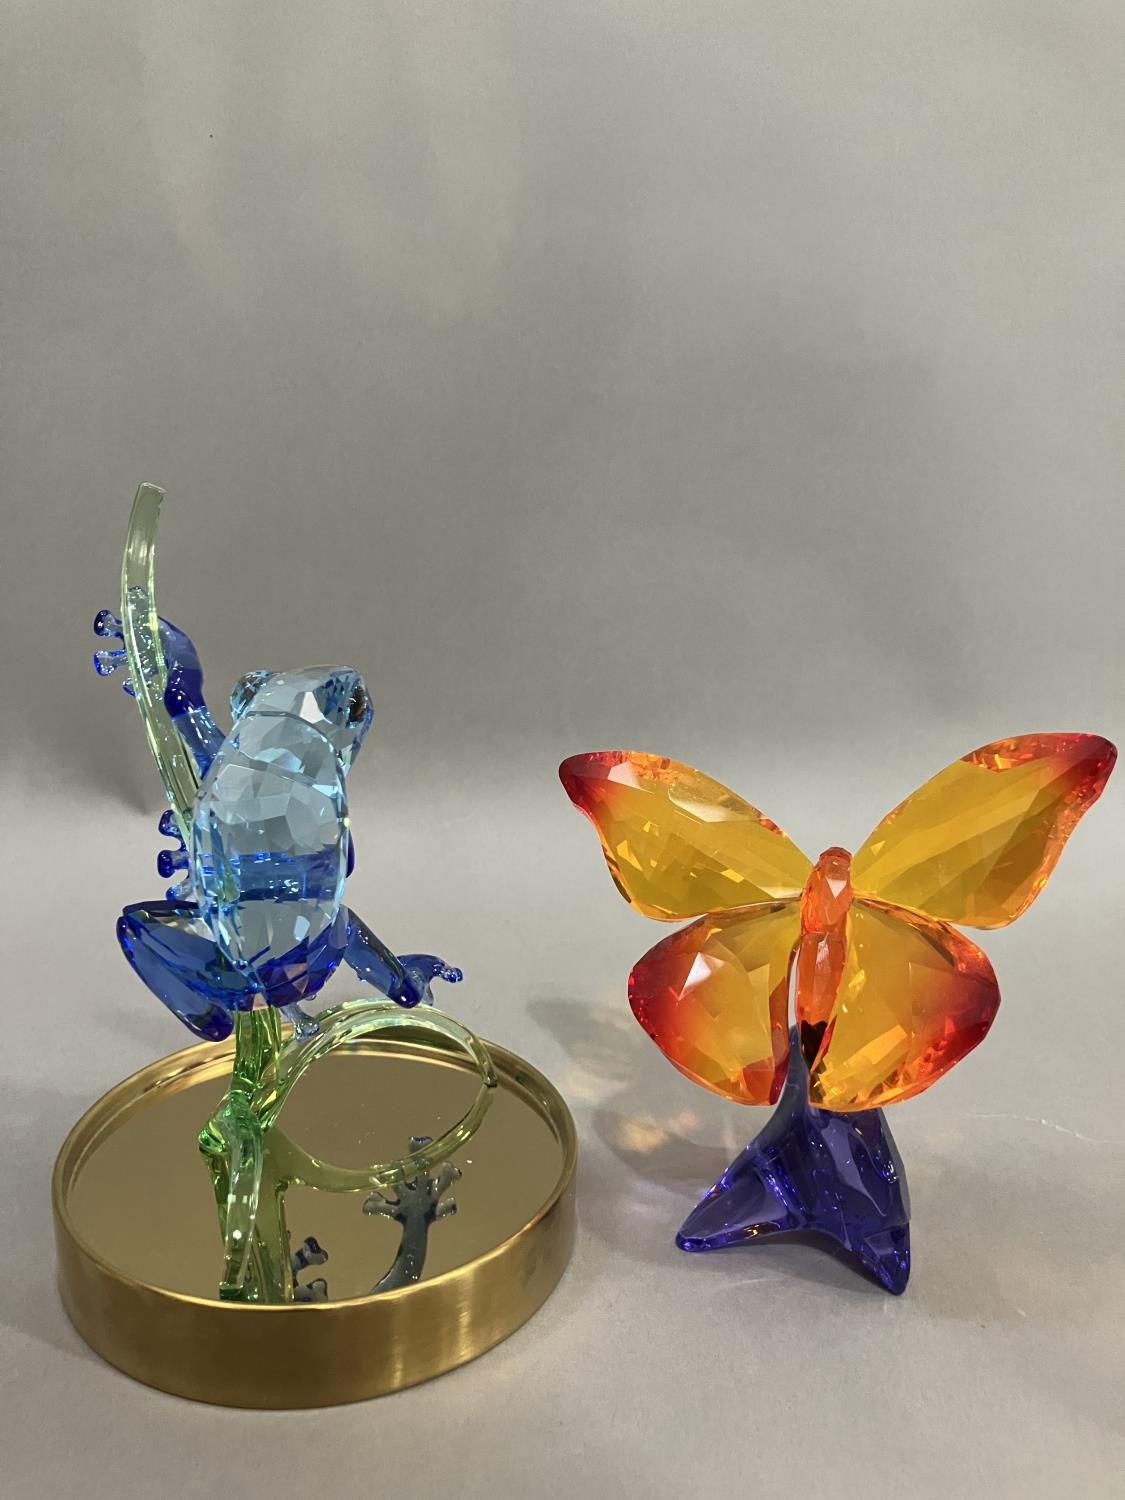 A Swarovski crystal blue frog on branch in glass dome together with an orange butterfly on purple - Image 3 of 3